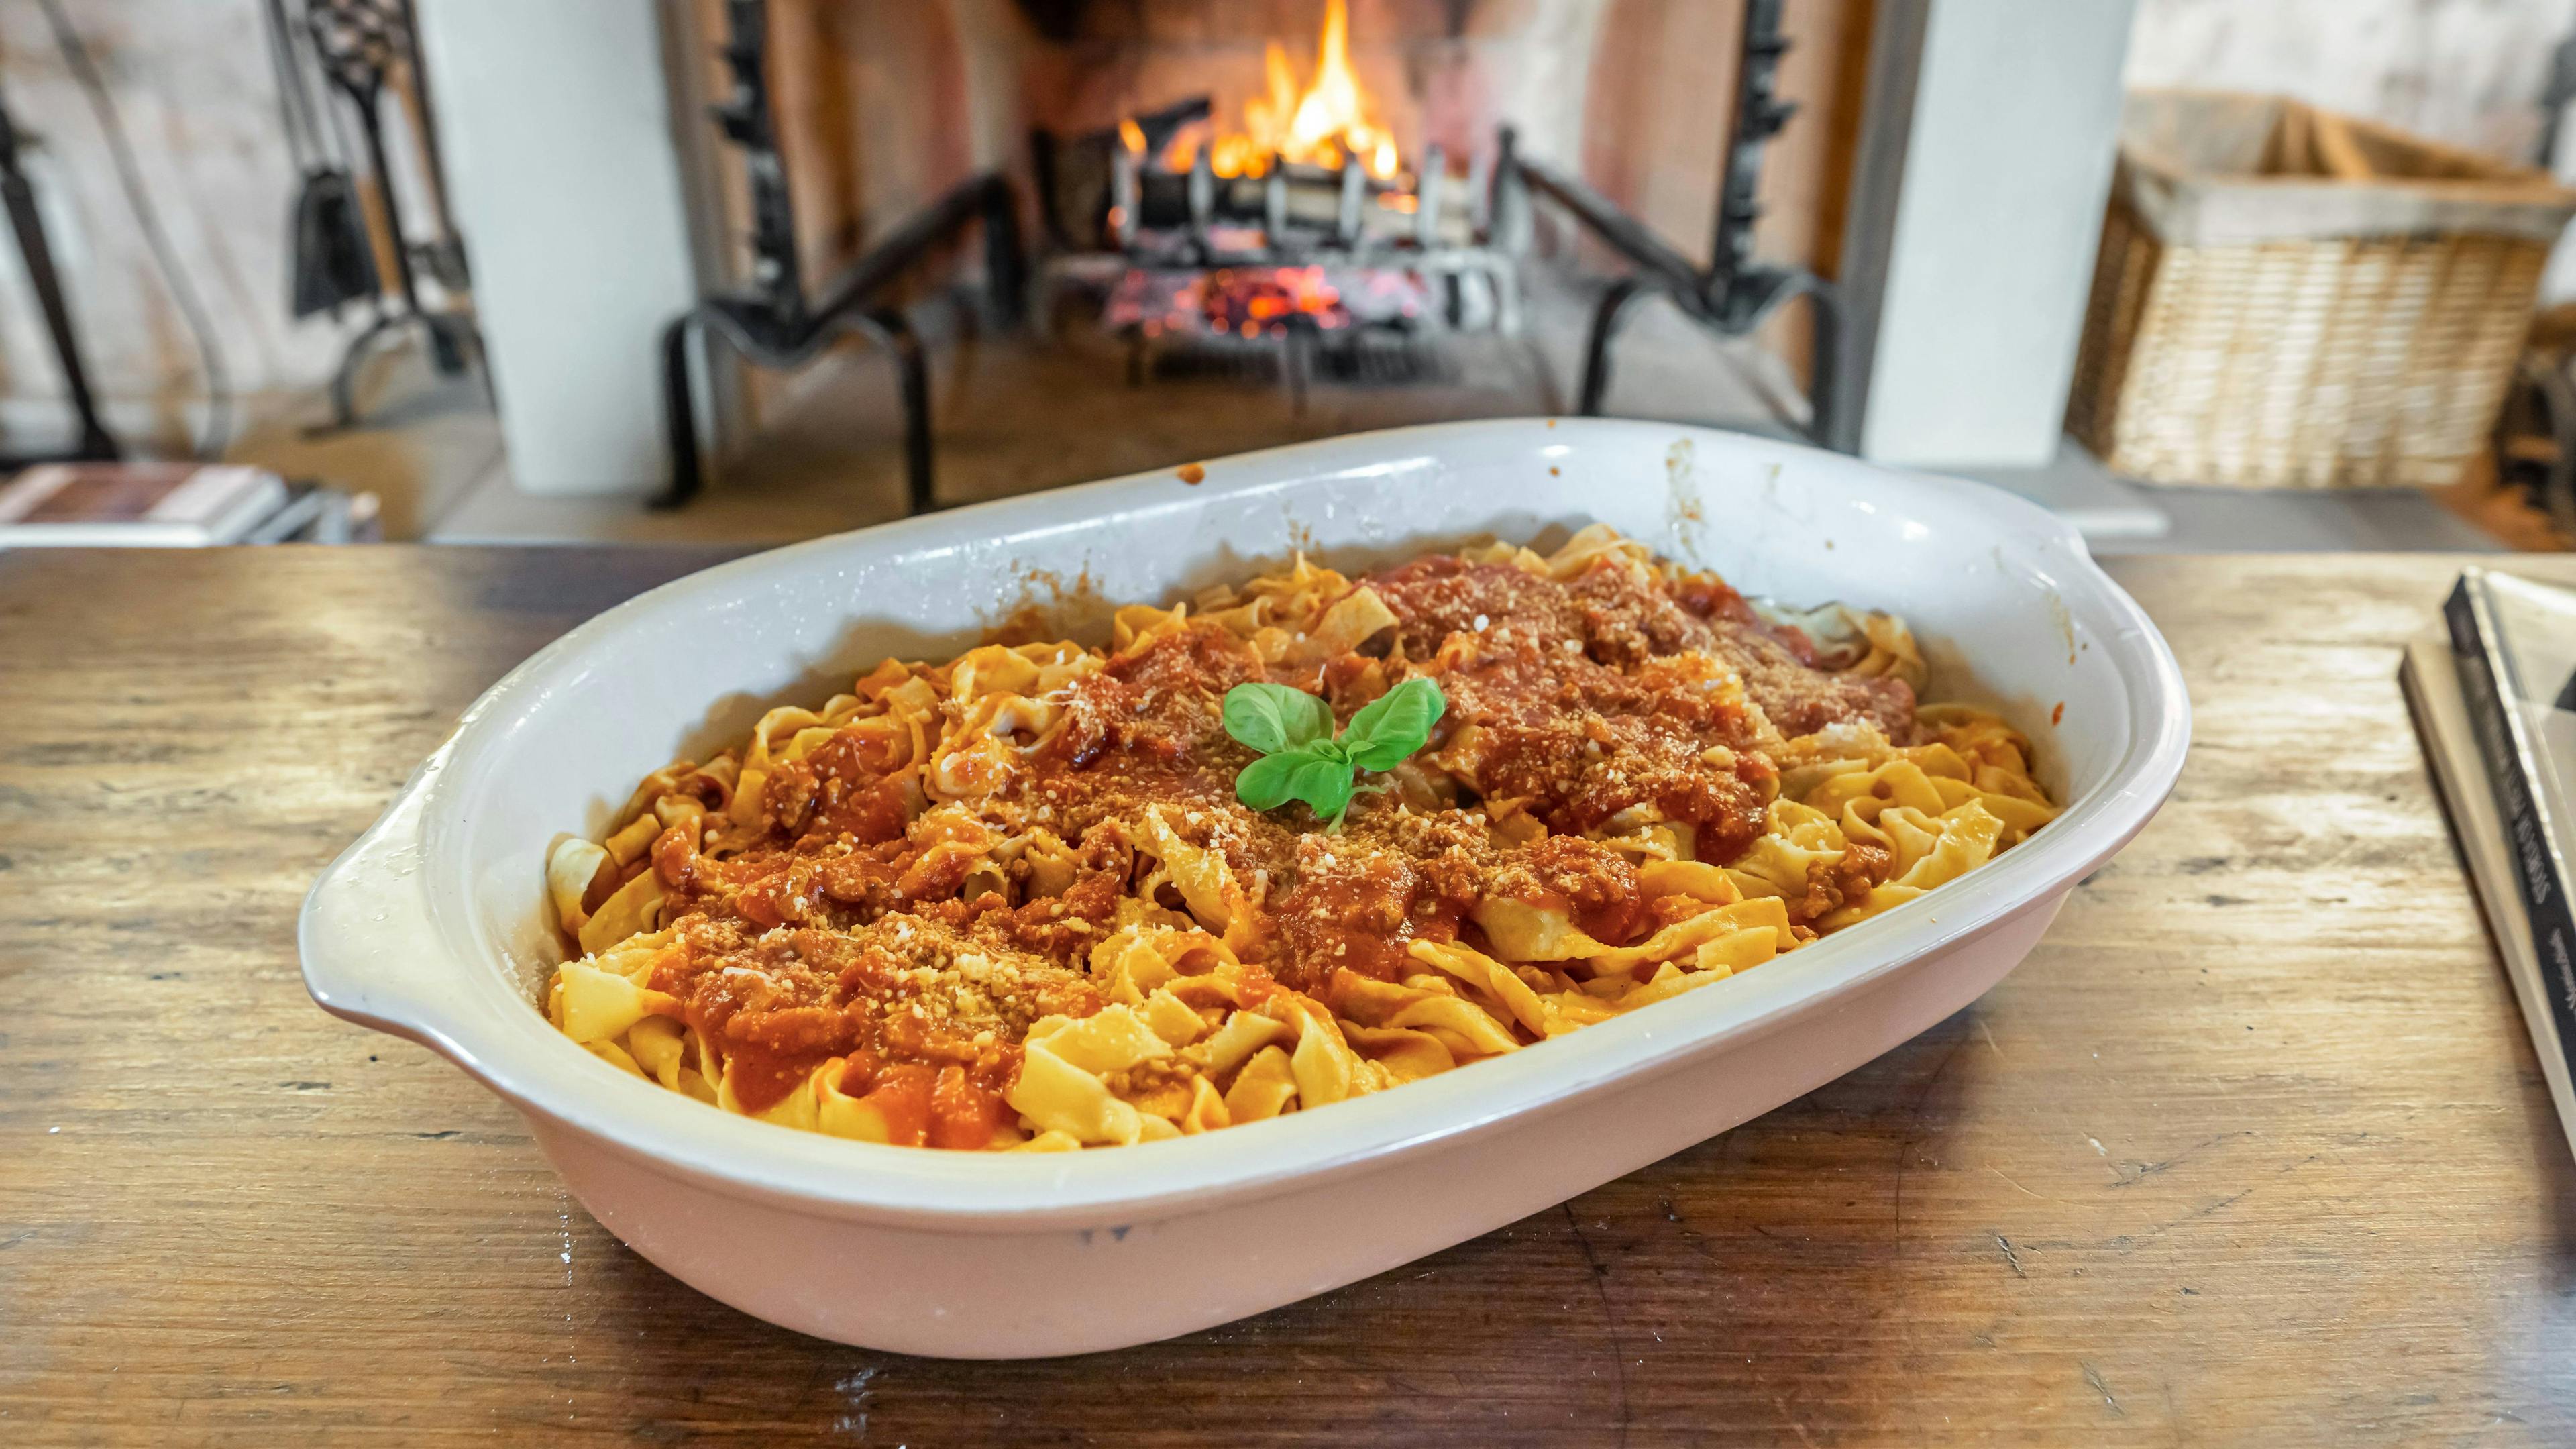 Plate of fettuccine with Umbrian ragù